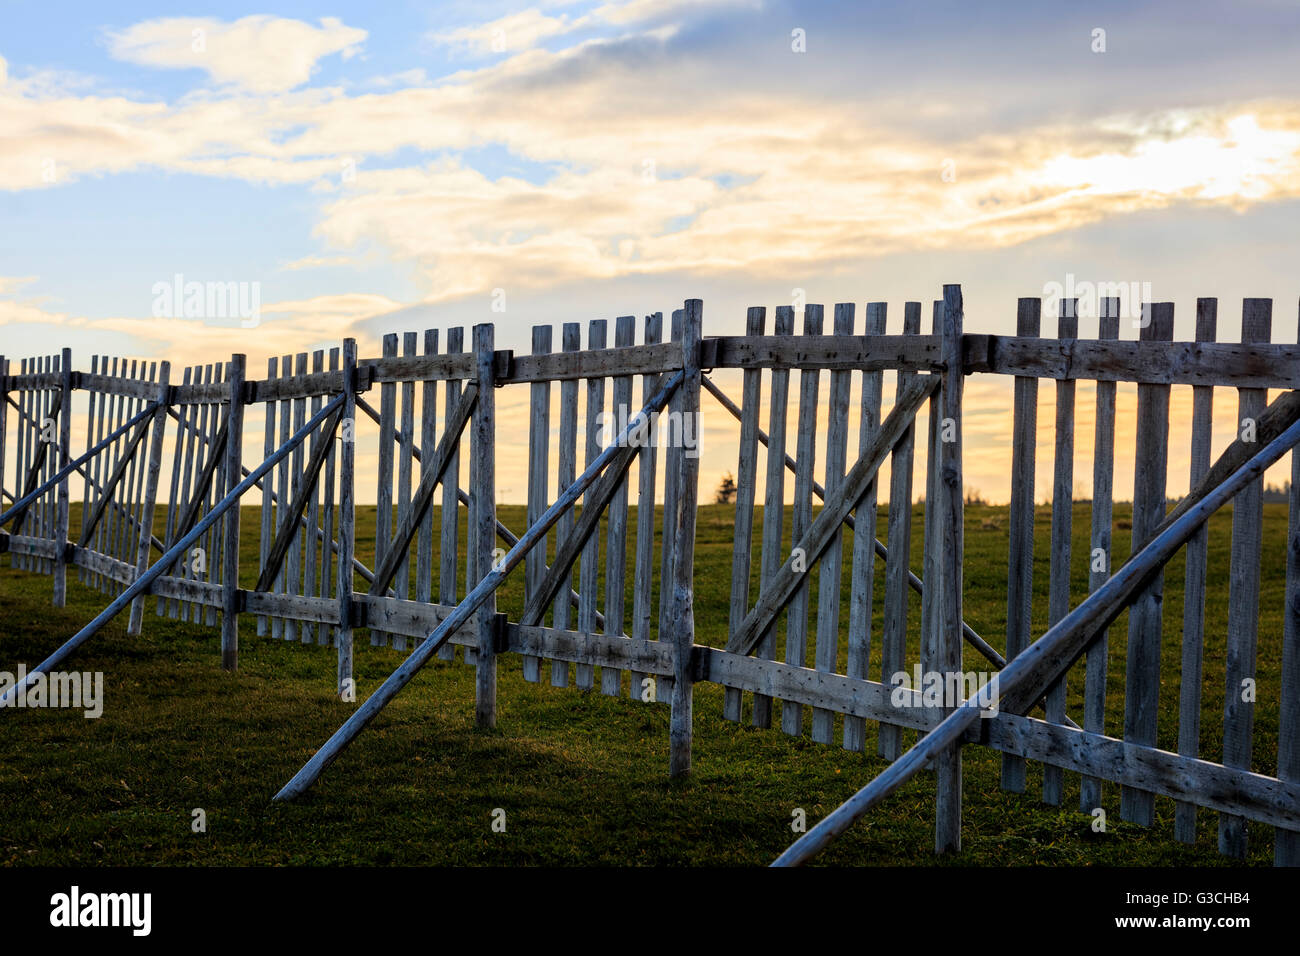 Snow fence in the evening, nature, landscape, winter, Stock Photo